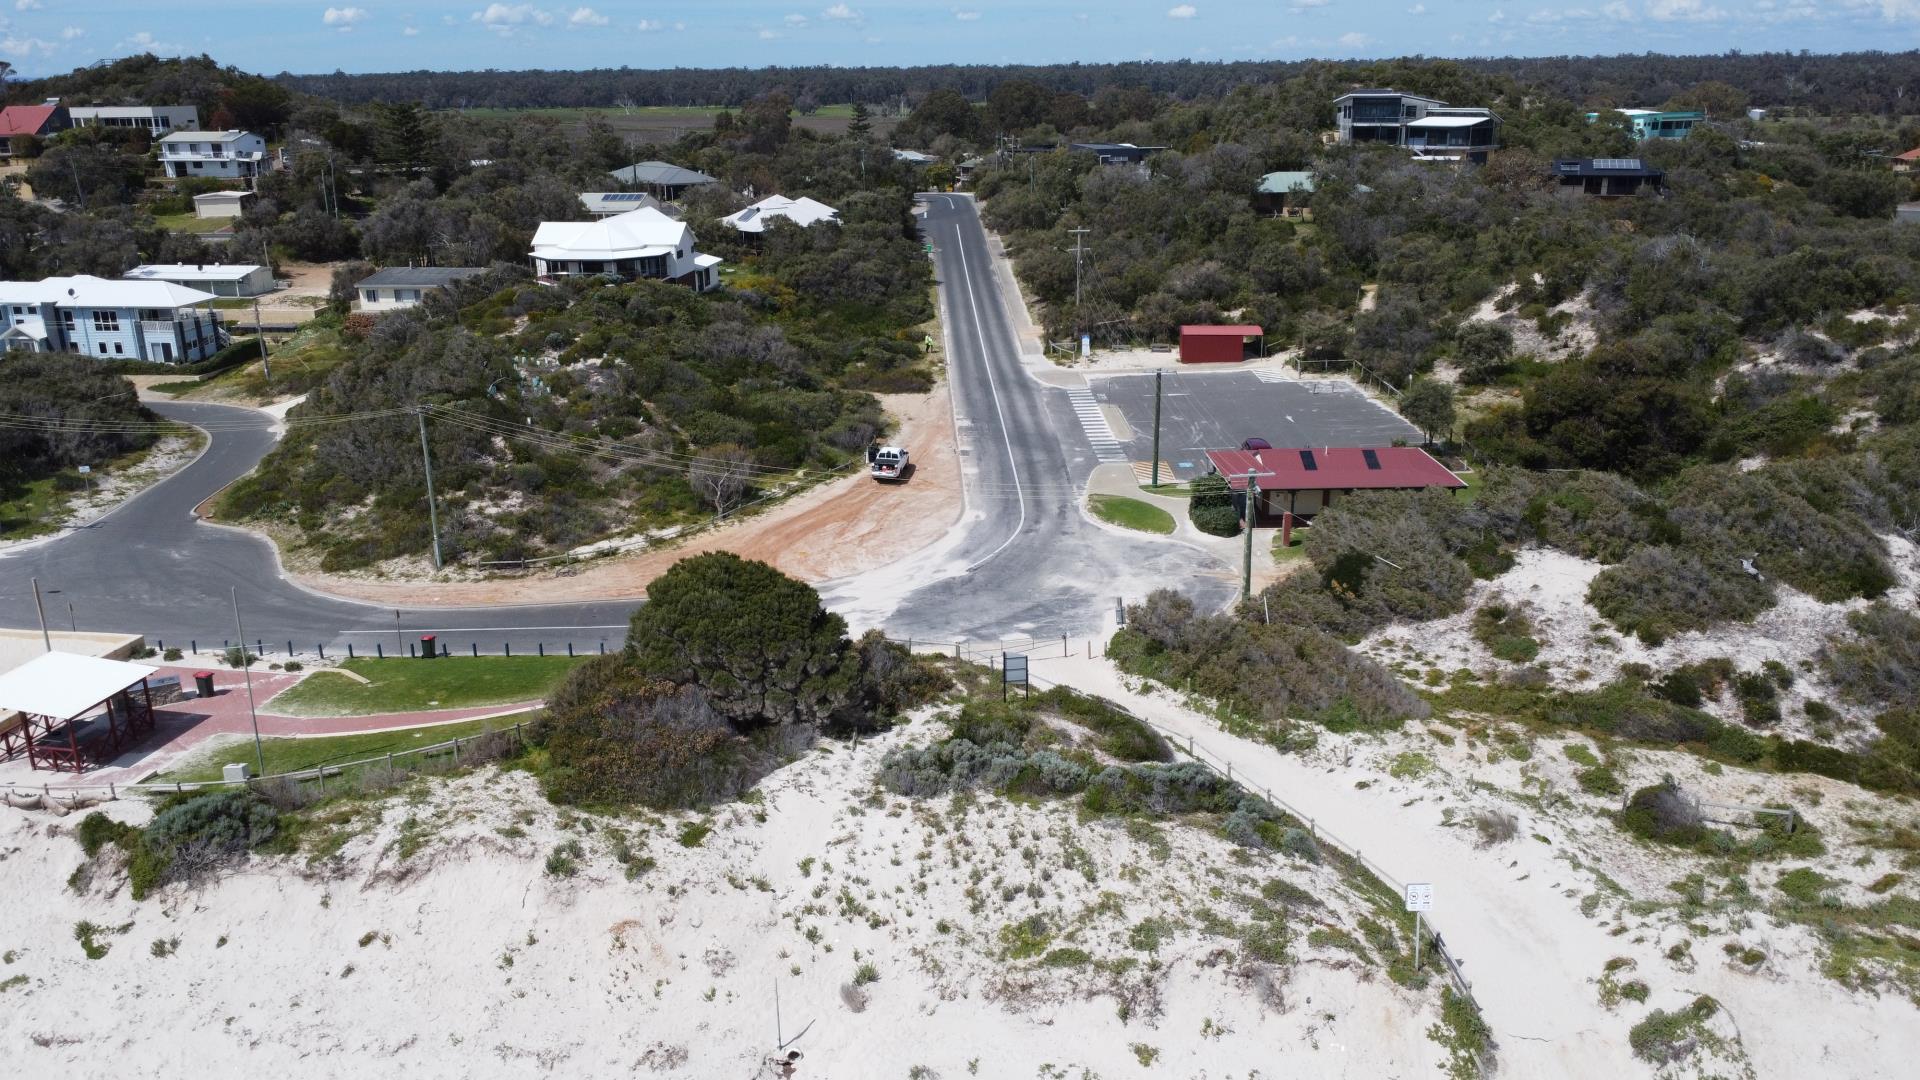 aerial photo of beach community, carpark and hill